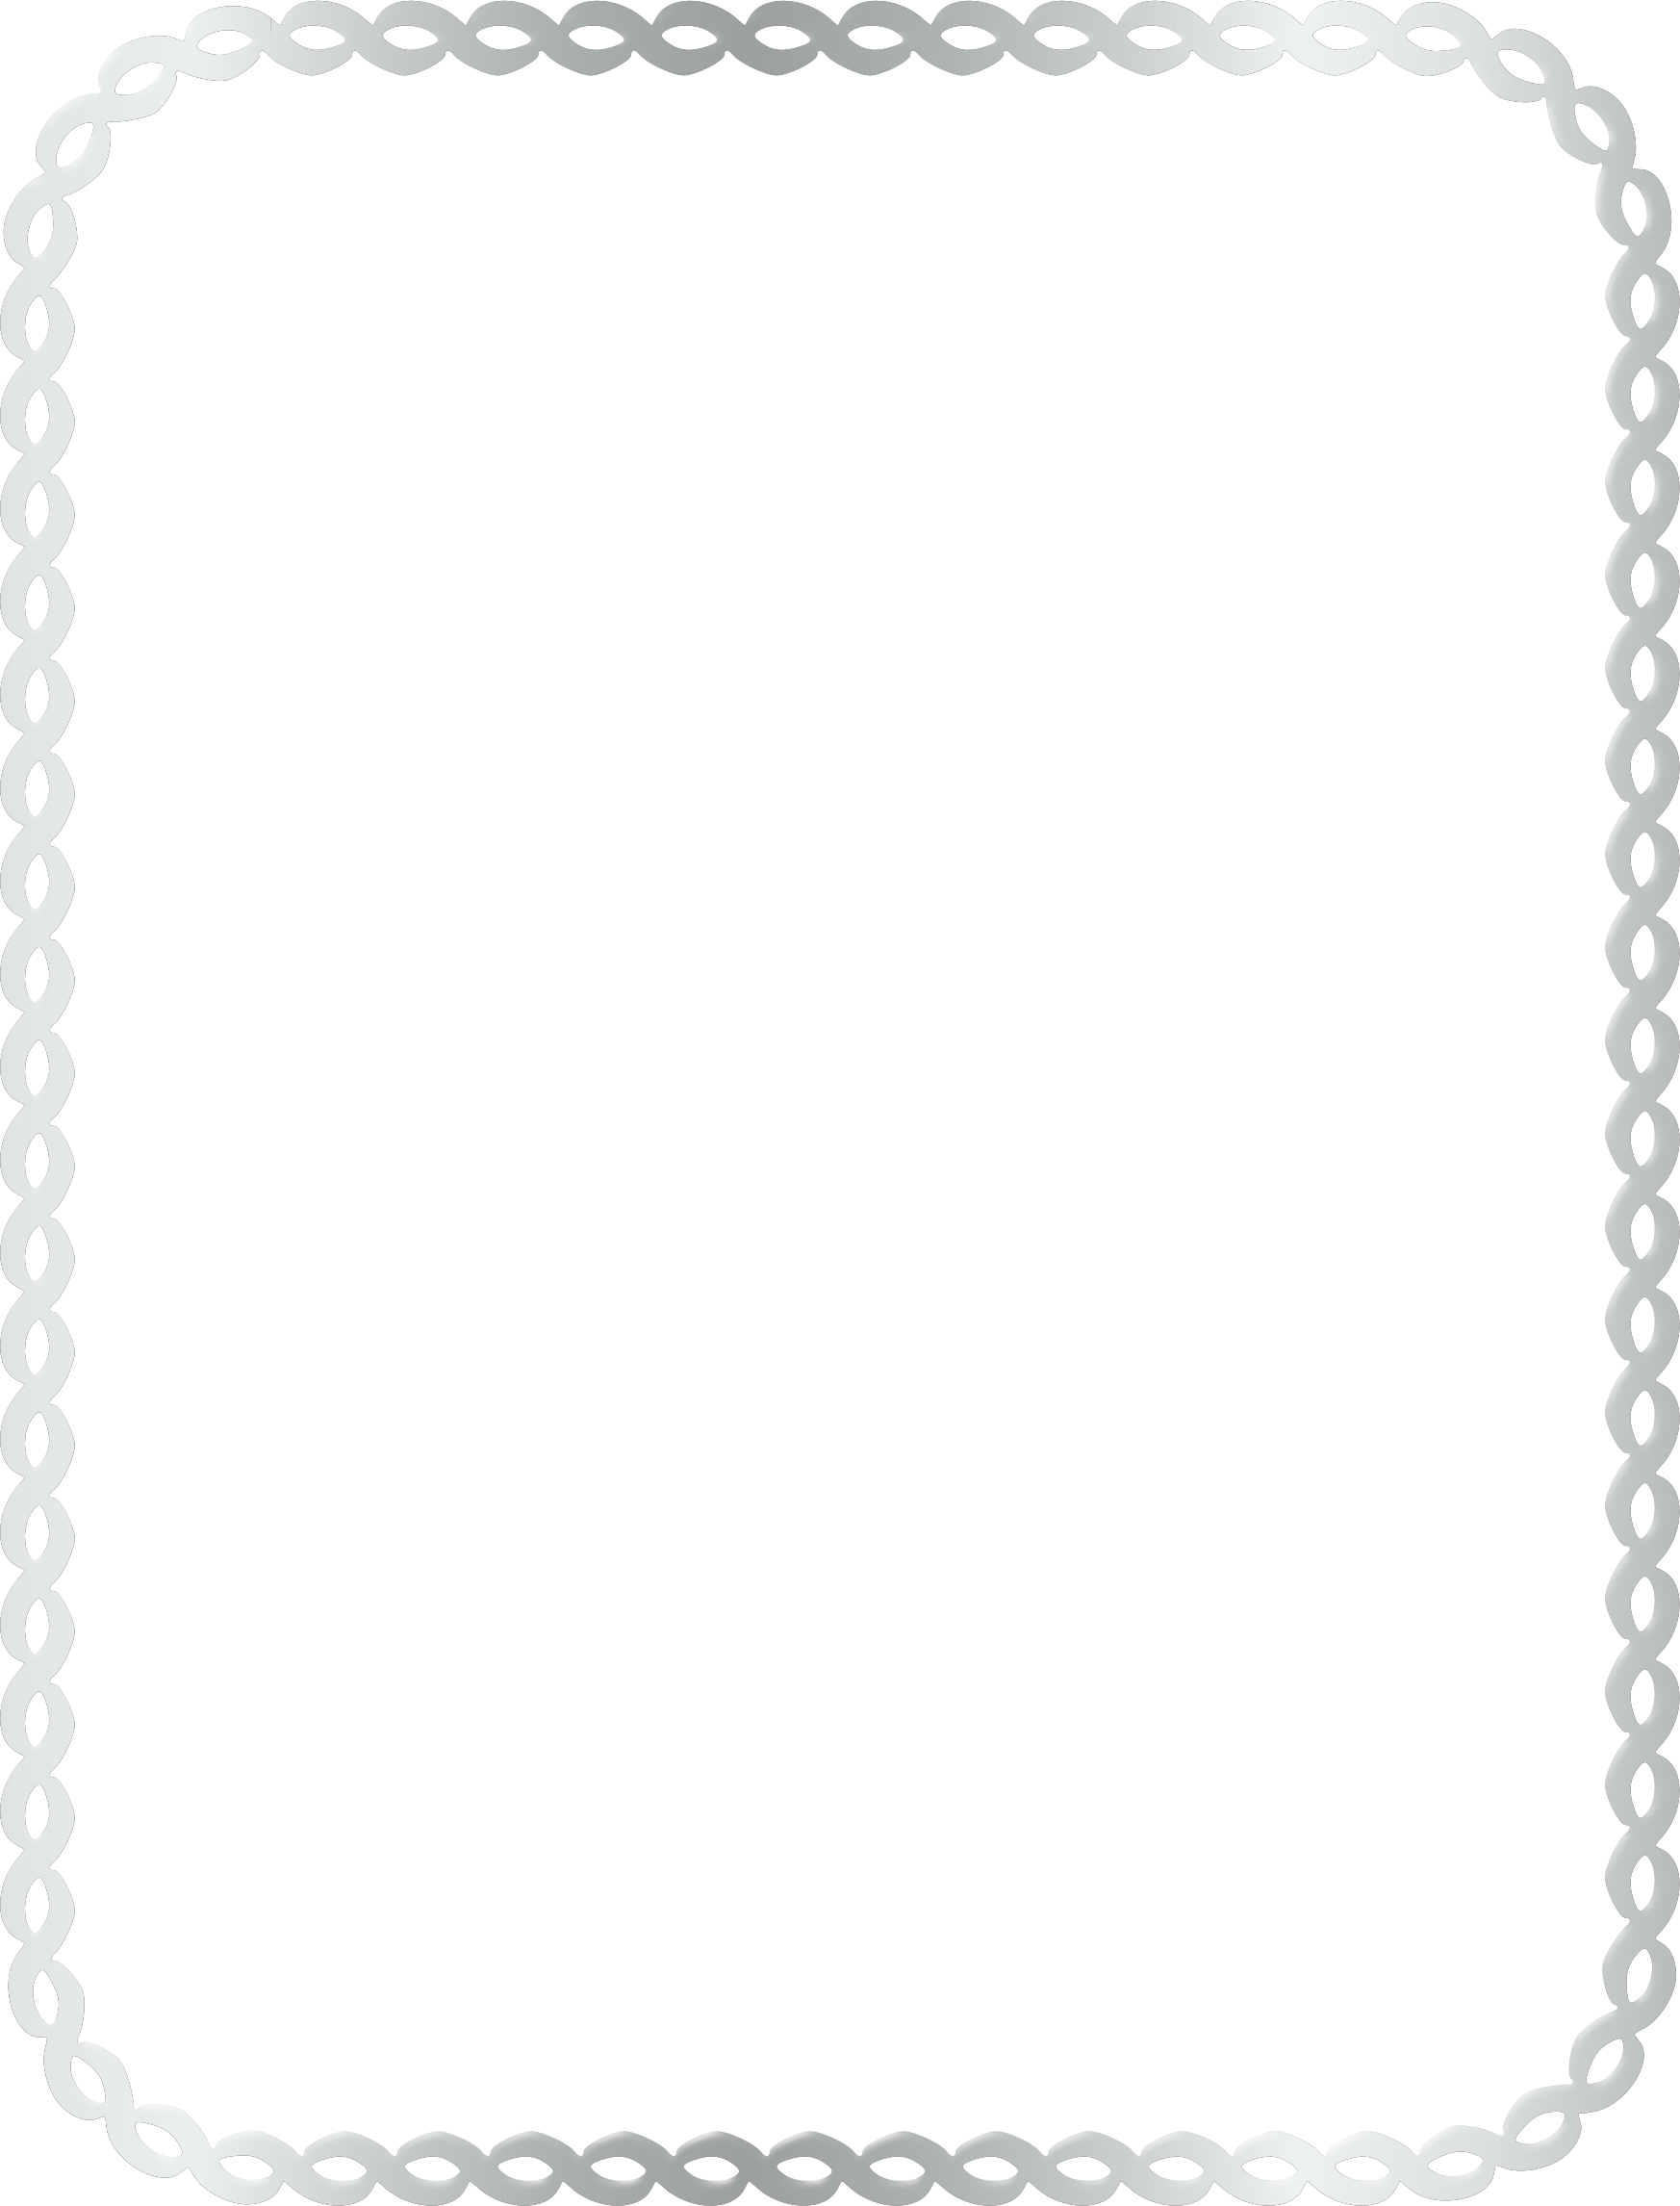 This Free Icons Png Design Of Chain Border 2 Clipart (1746x2292), Png Download